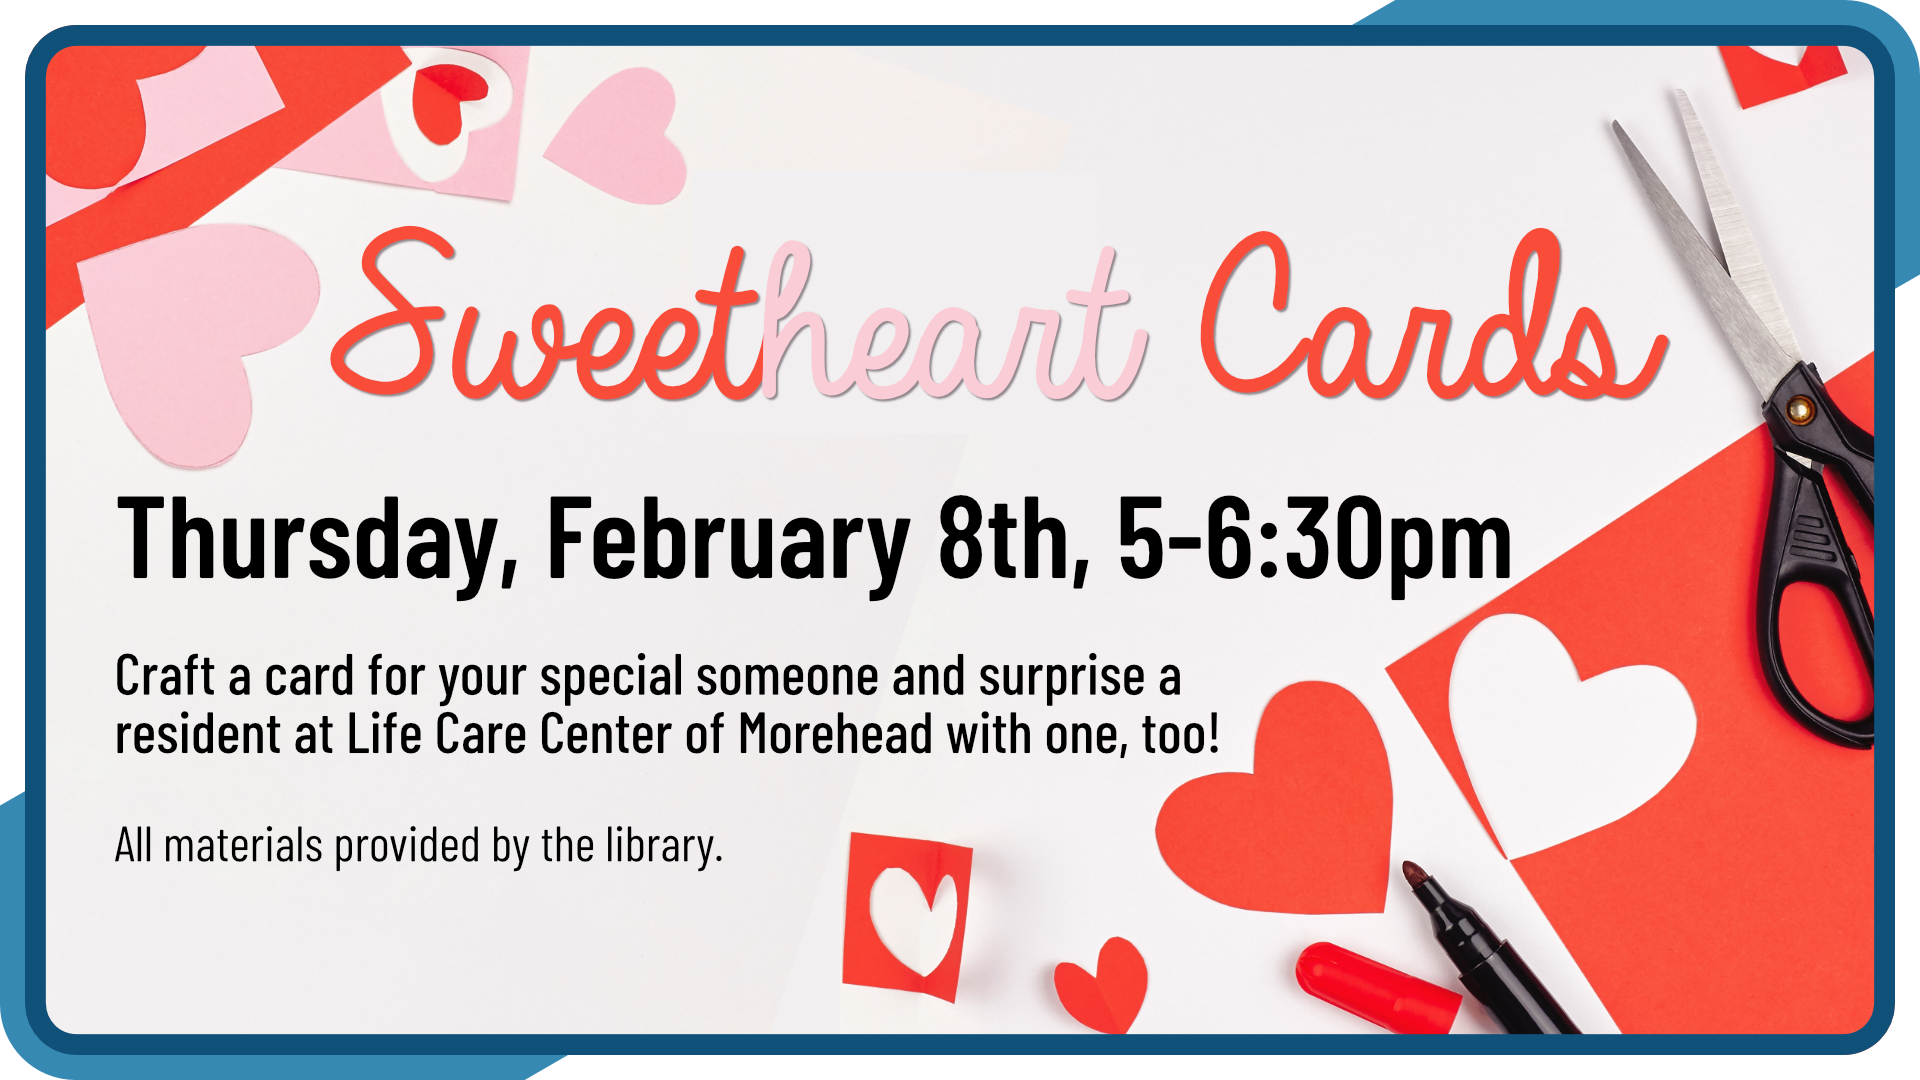 SweetheART Cards, February 8th from 5 to 6:30pm, intended for all ages